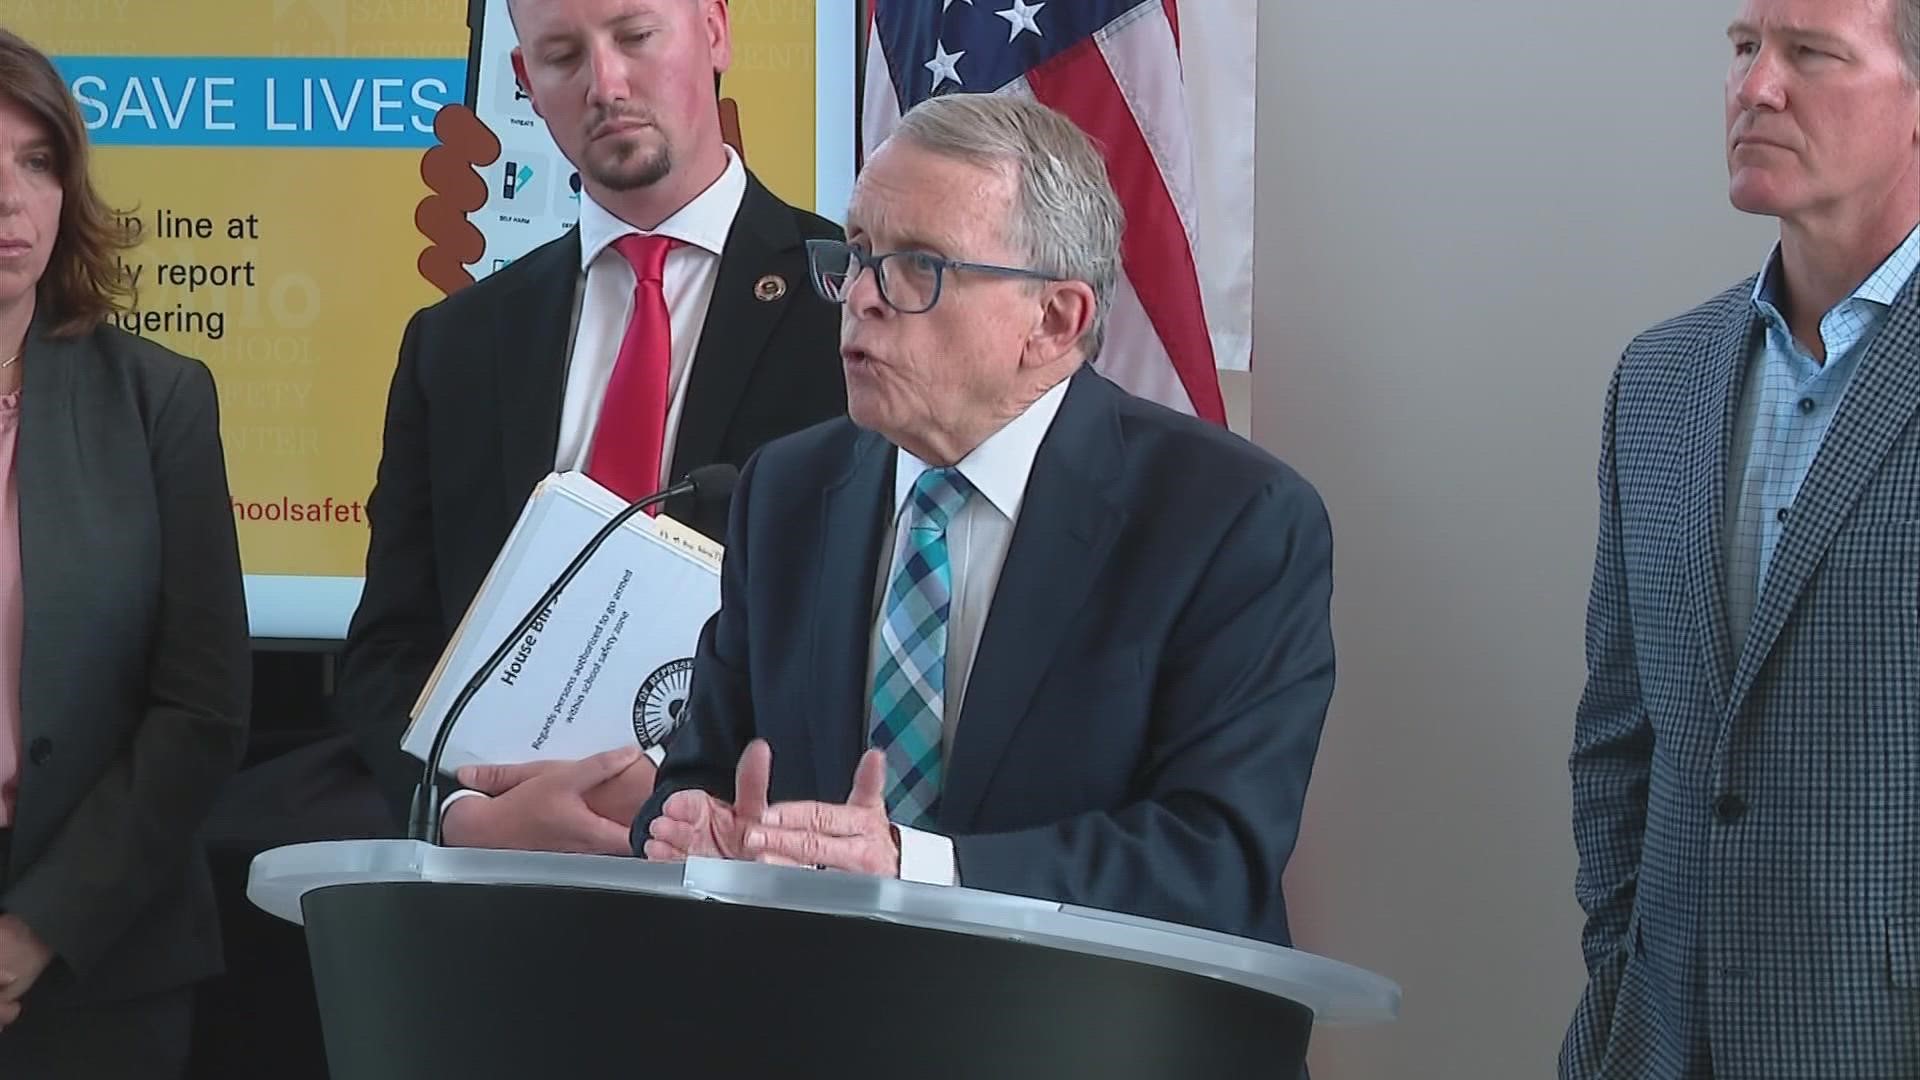 Ohio Gov. Mike DeWine has signed a bill into law allowing school districts the option of arming employees.